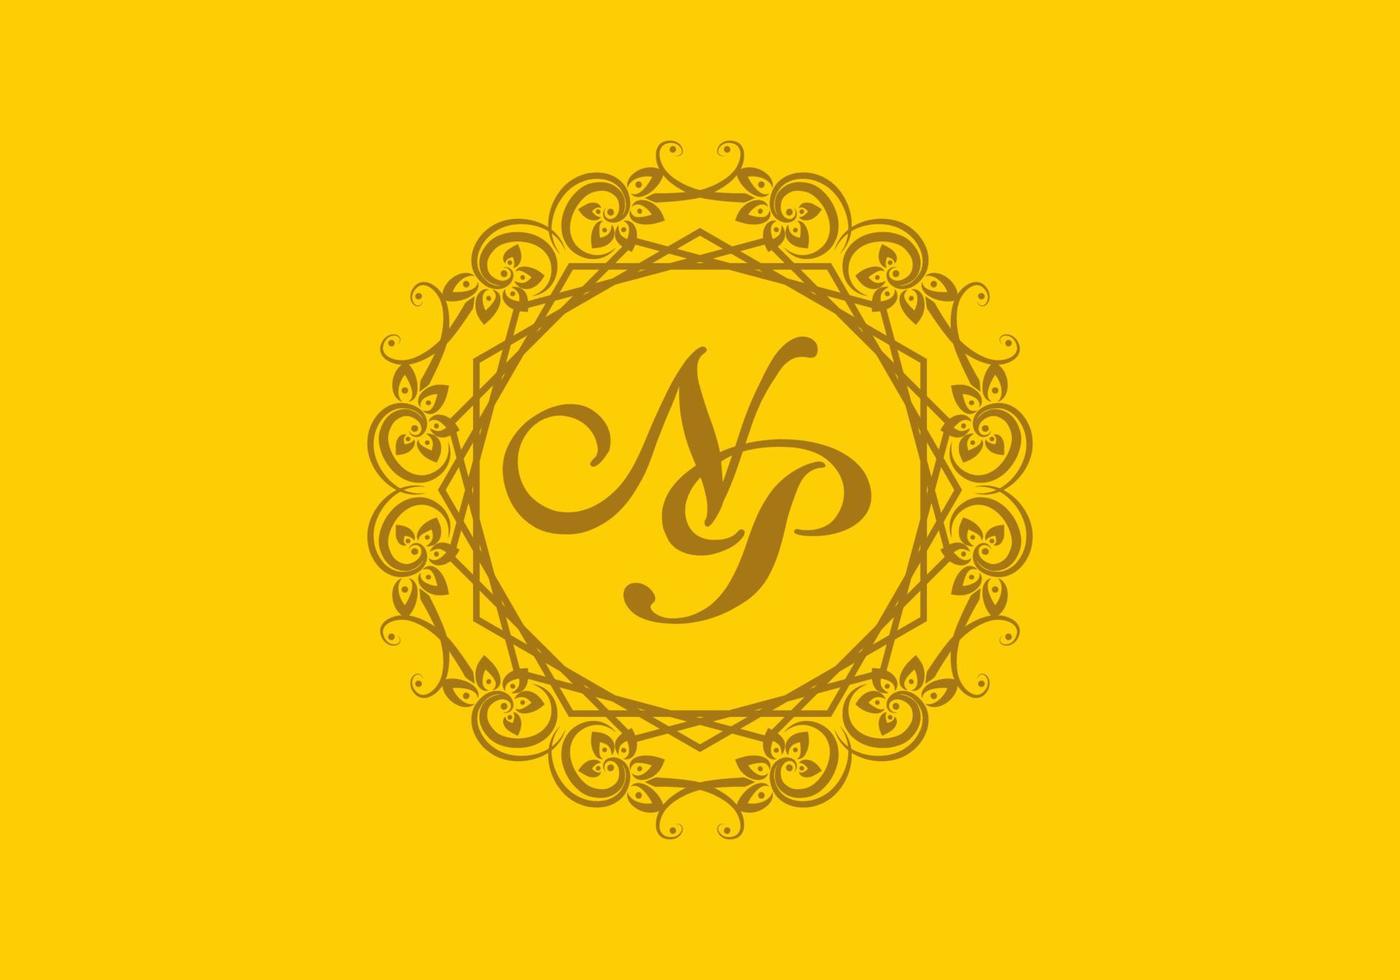 NP initial letter in vintage circle frame vector